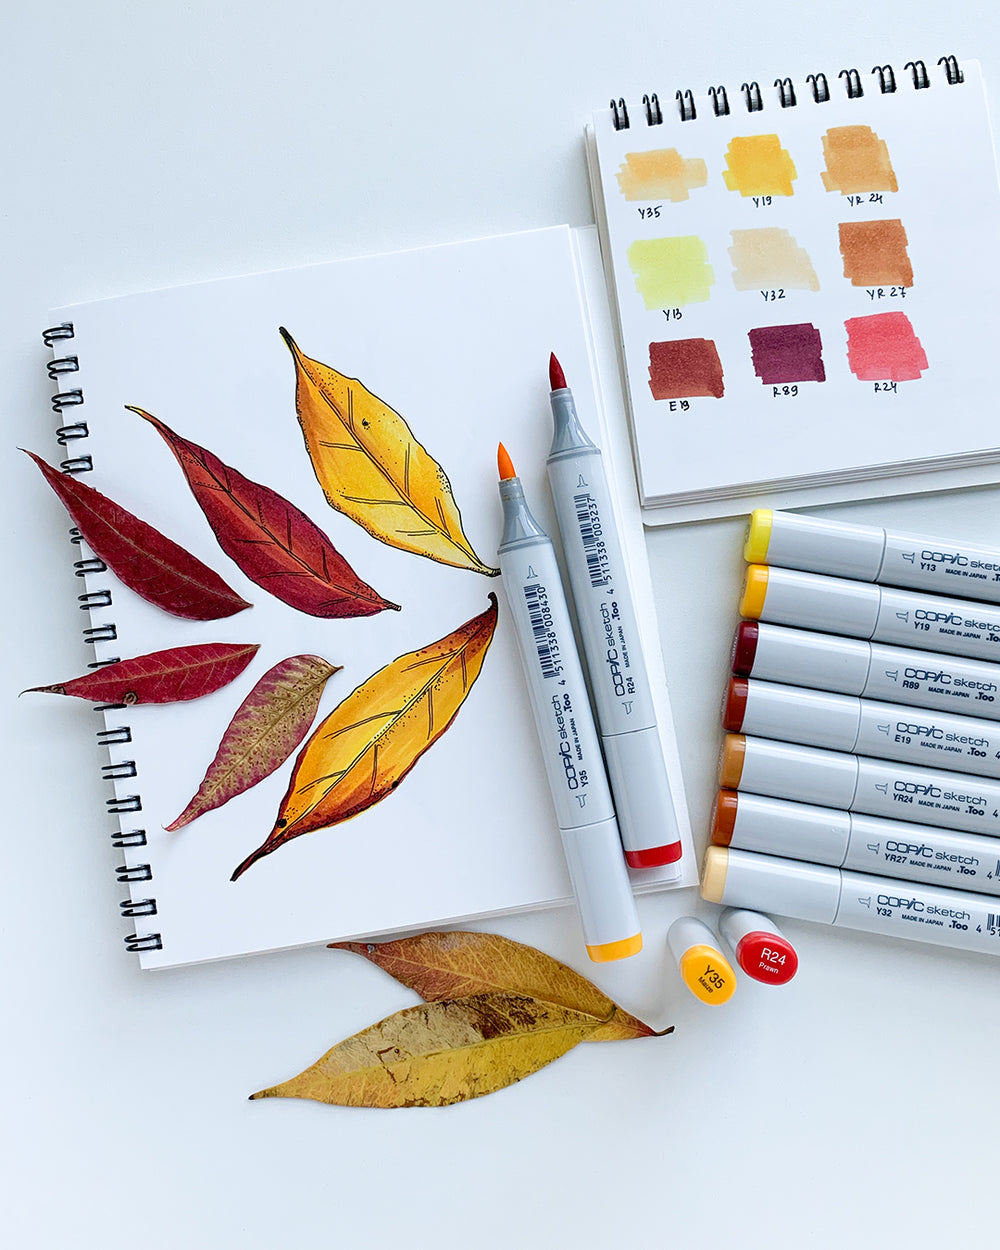 COPIC Official Website - Copic is a brand of professional quality markers  founded in 1987 by the Too Group in Tokyo, Japan. Our durable graphic  markers are alcohol-based, refillable and available in